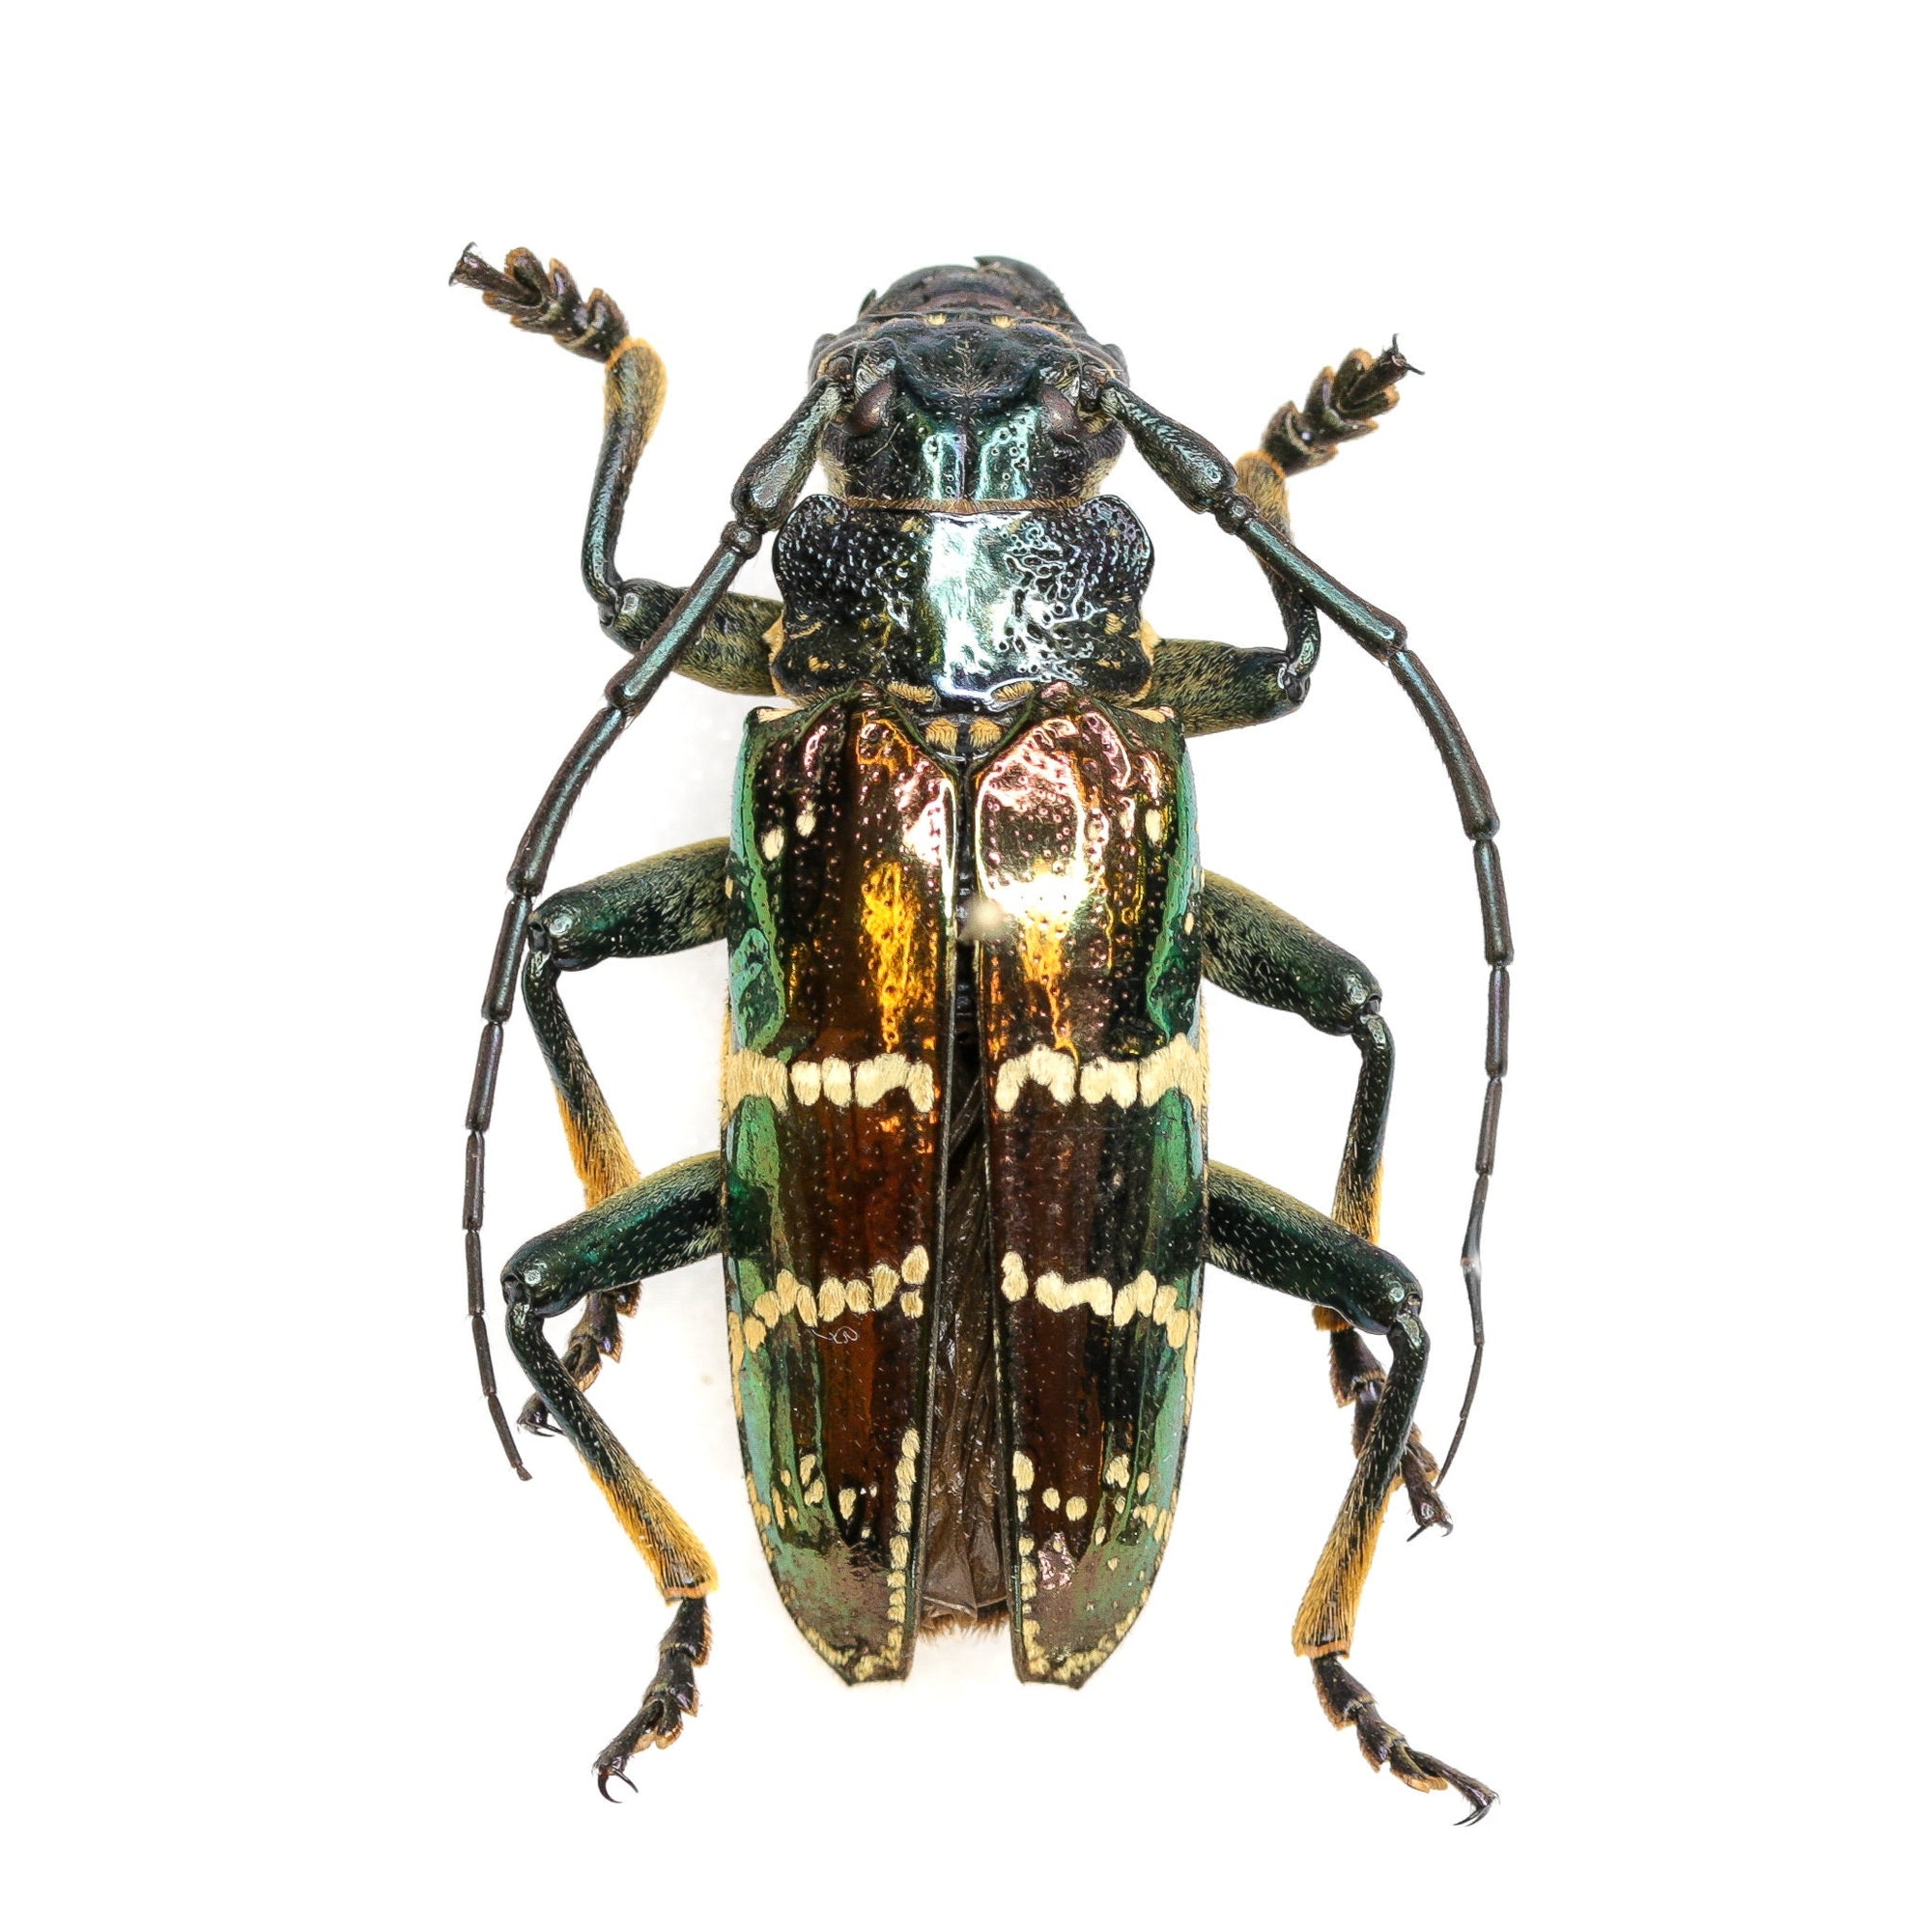 Insect Collection Real Beetles | Pinned Entomology Specimens and Data | Presented in a Gift Box